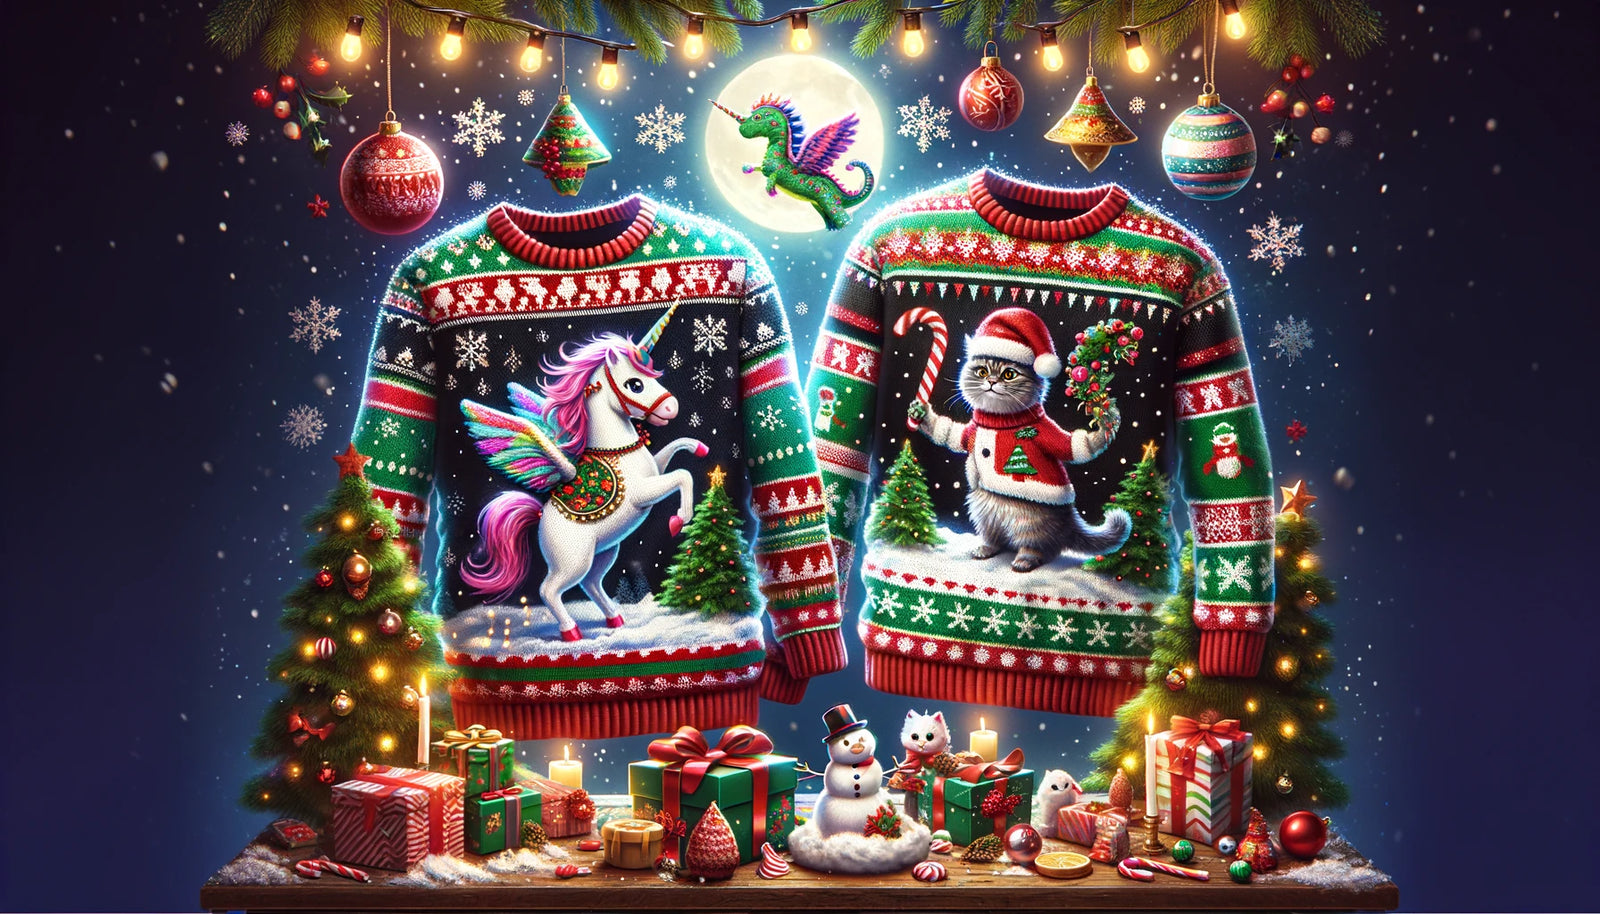 Should You Wear a Christmas Jumper on Christmas Day?